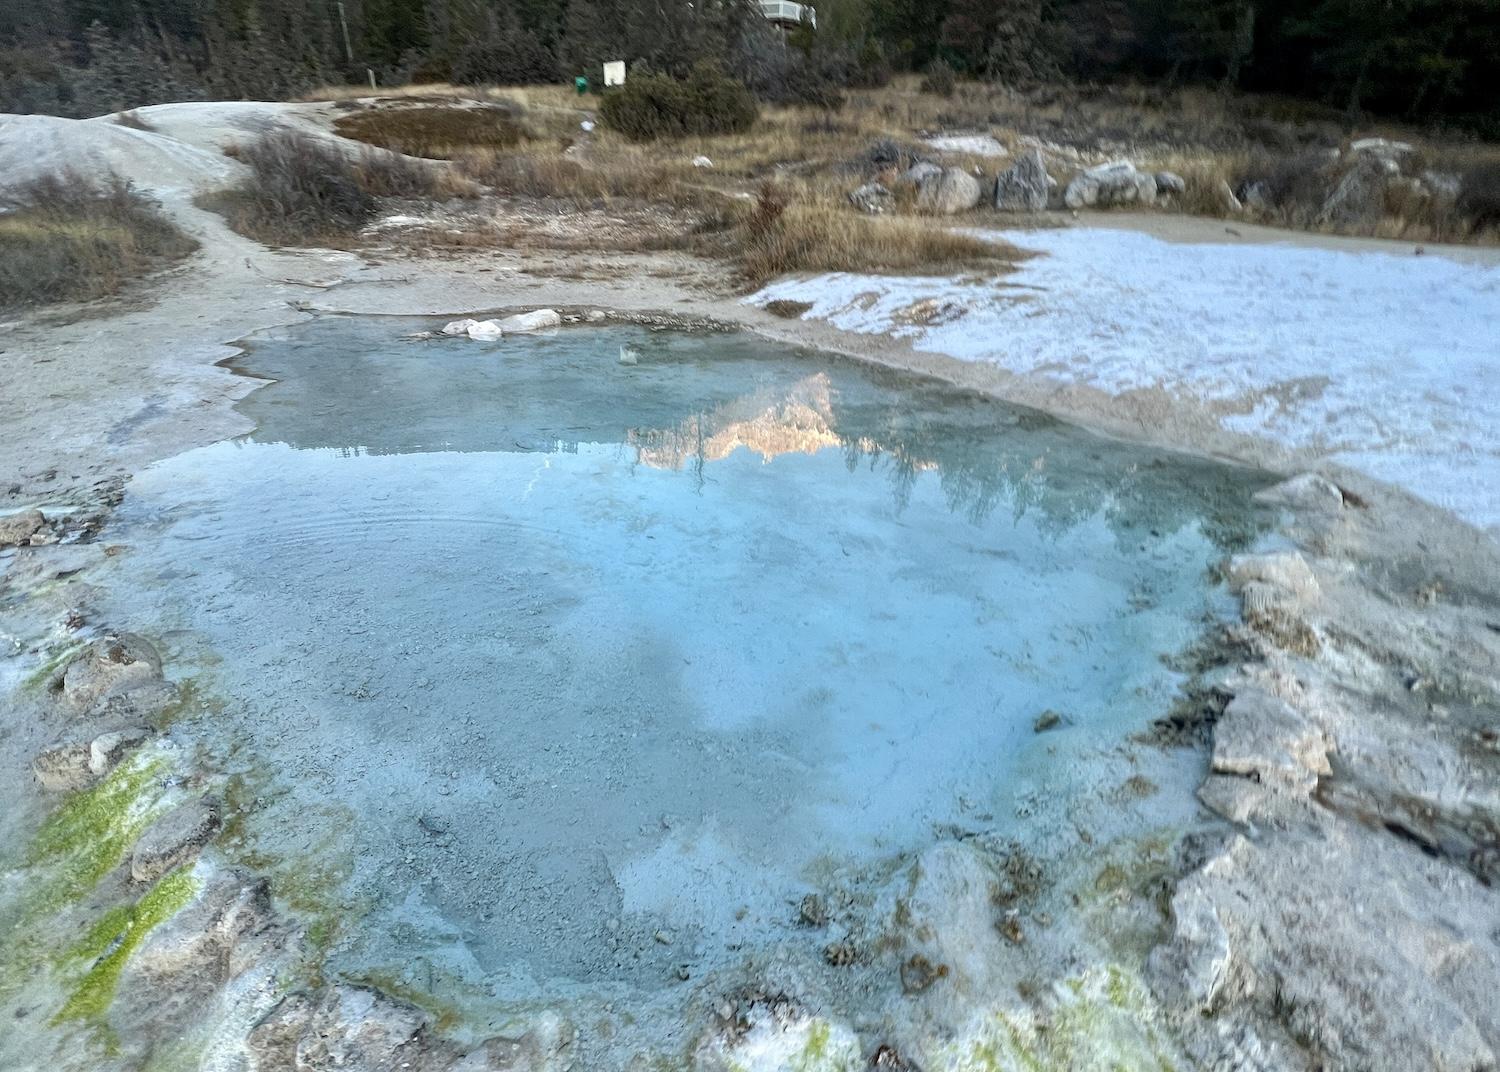 At Fairmont Hot Springs Resort, near one of the first buildings erected to help people bathe in thermal waters, are natural rock pools of hot mineral water first used by Indigenous People.